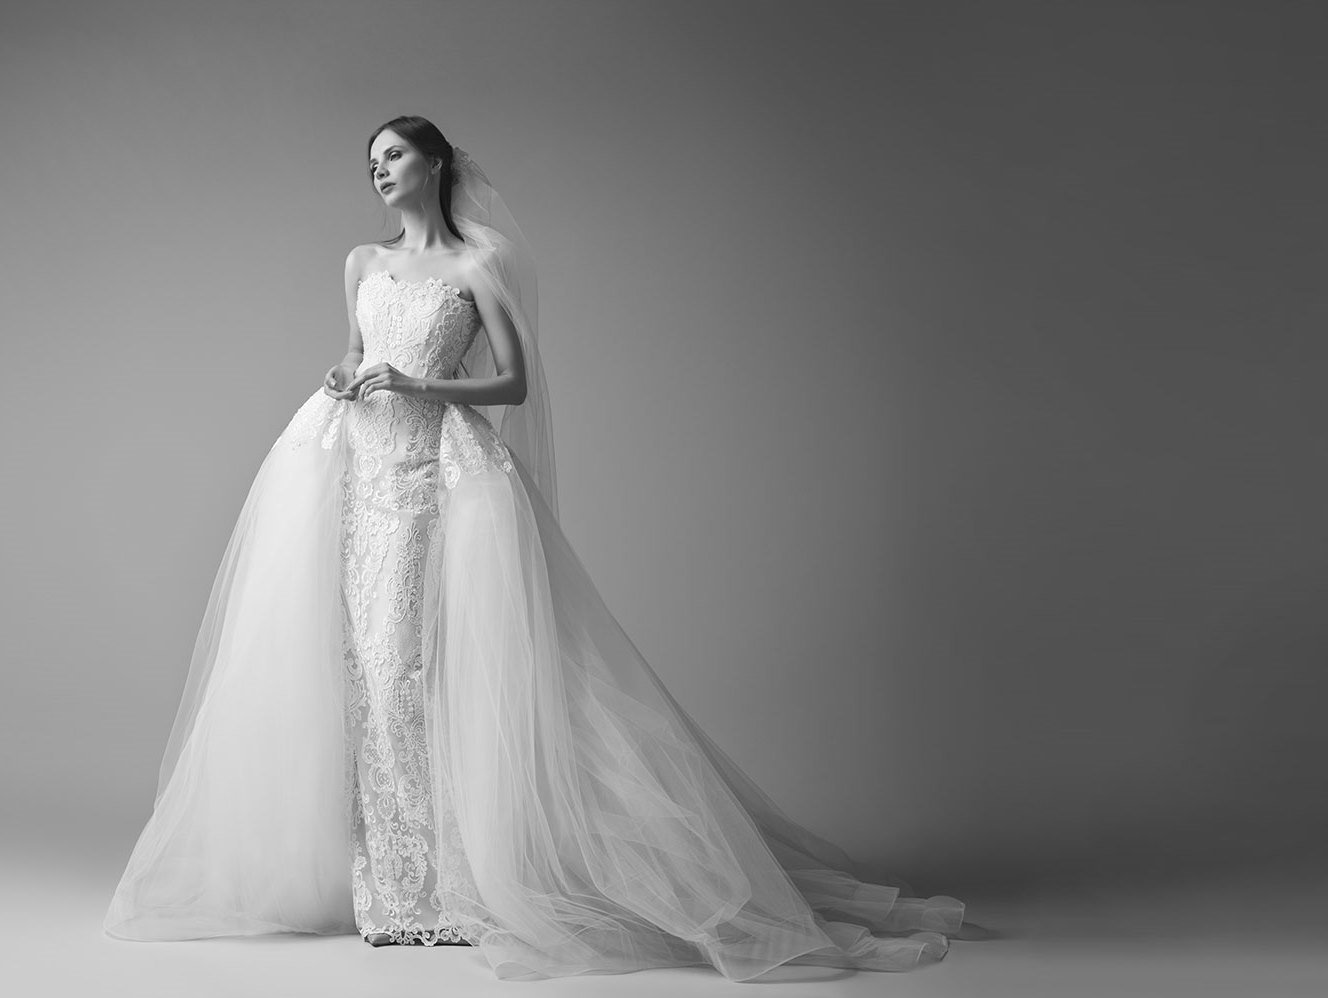 Romantic Lace Wedding Dress with Tulle Overskirt from Saiid Kobeisy's 2017 Collection